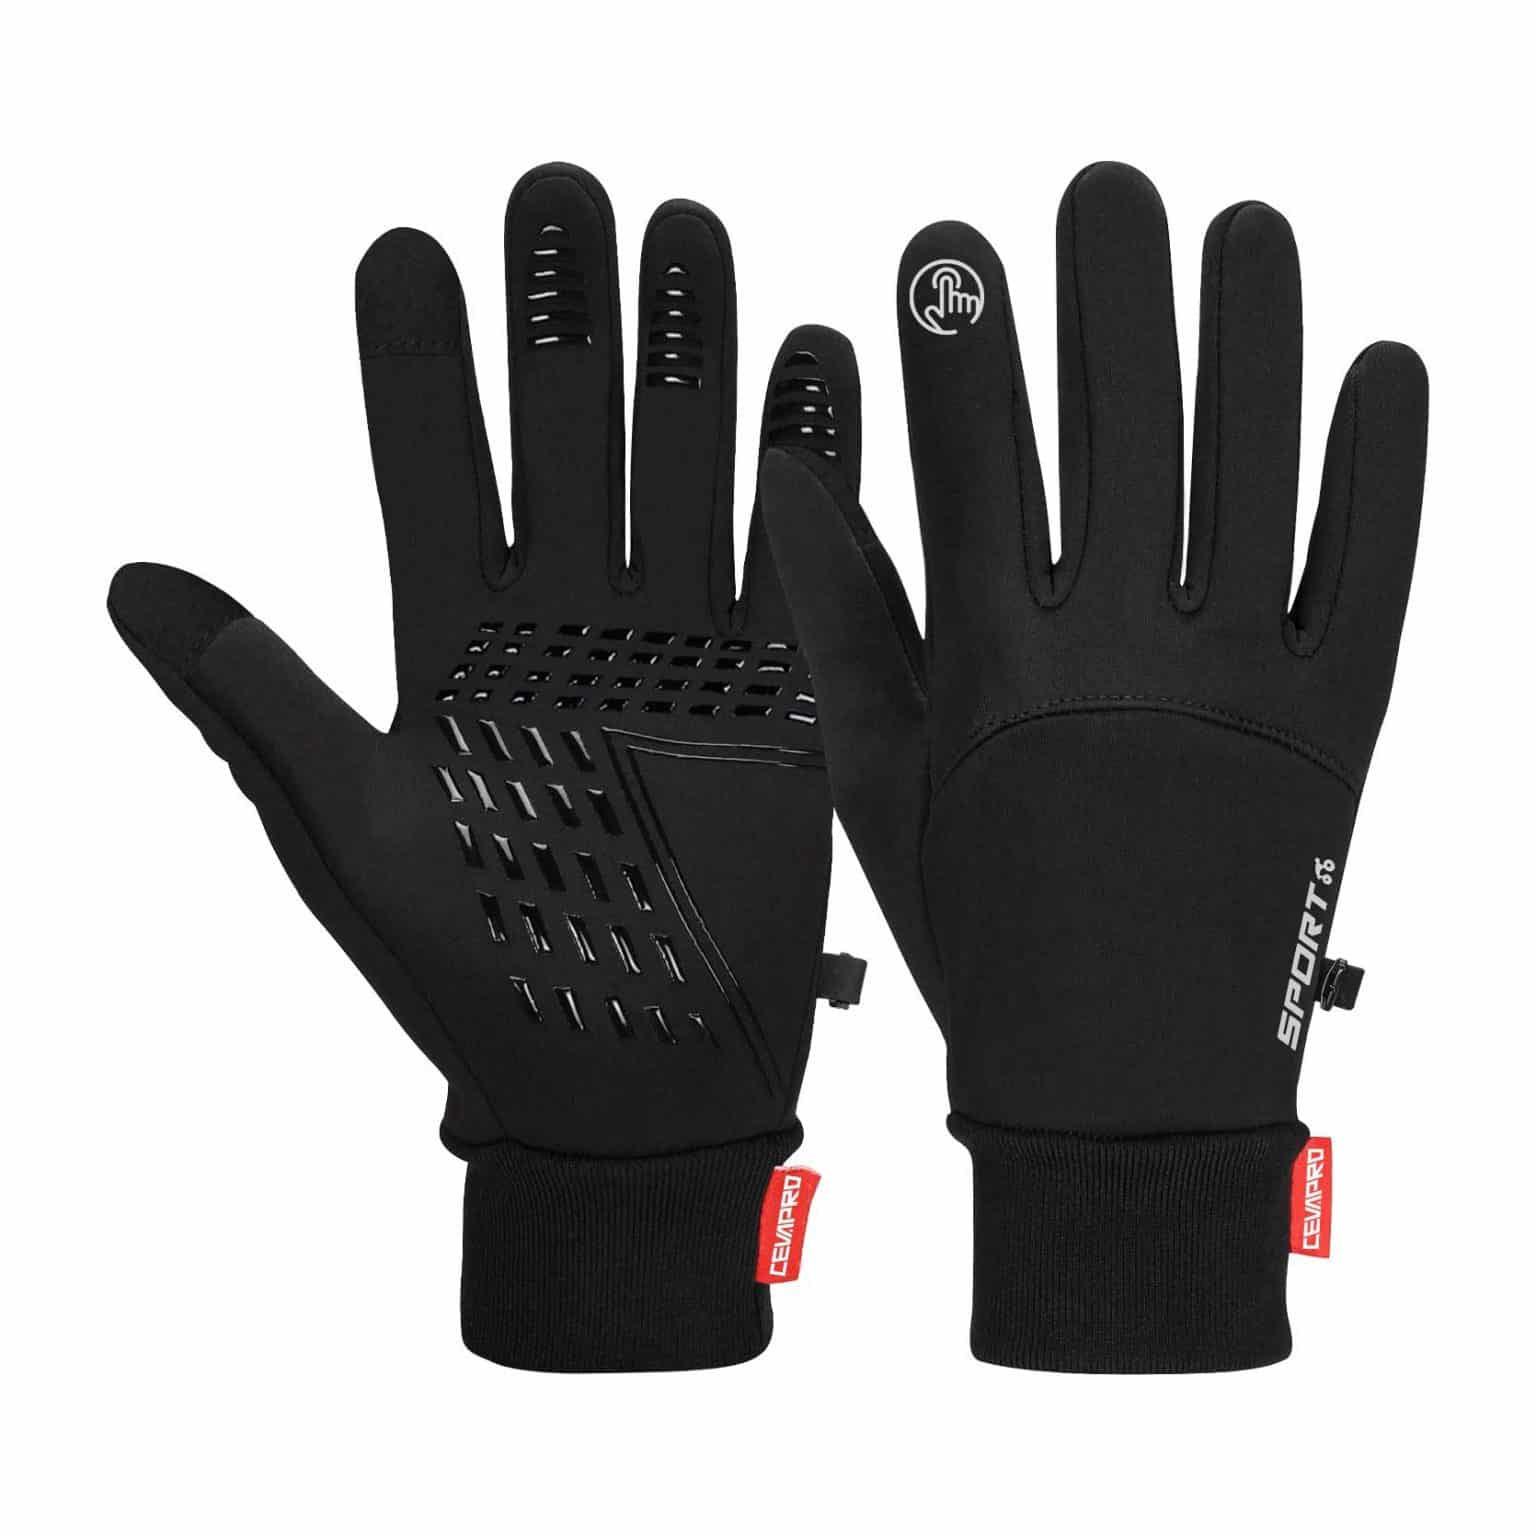 Top 10 Best Texting Gloves in 2023 Reviews | Buyer's Guide